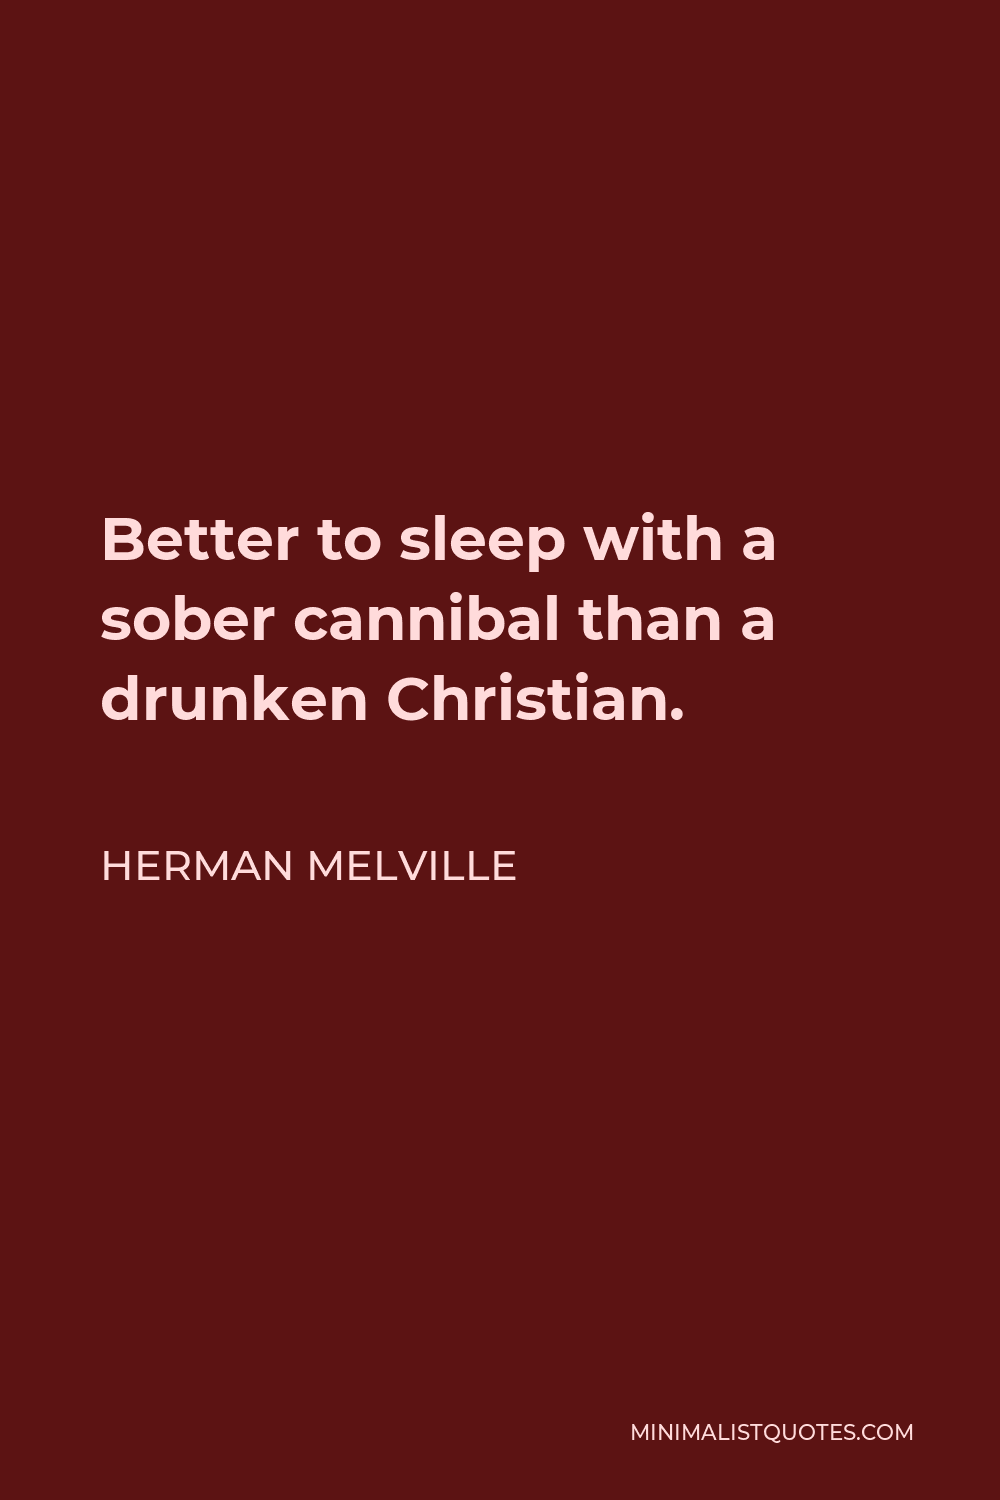 Herman Melville Quote - Better to sleep with a sober cannibal than a drunken Christian.